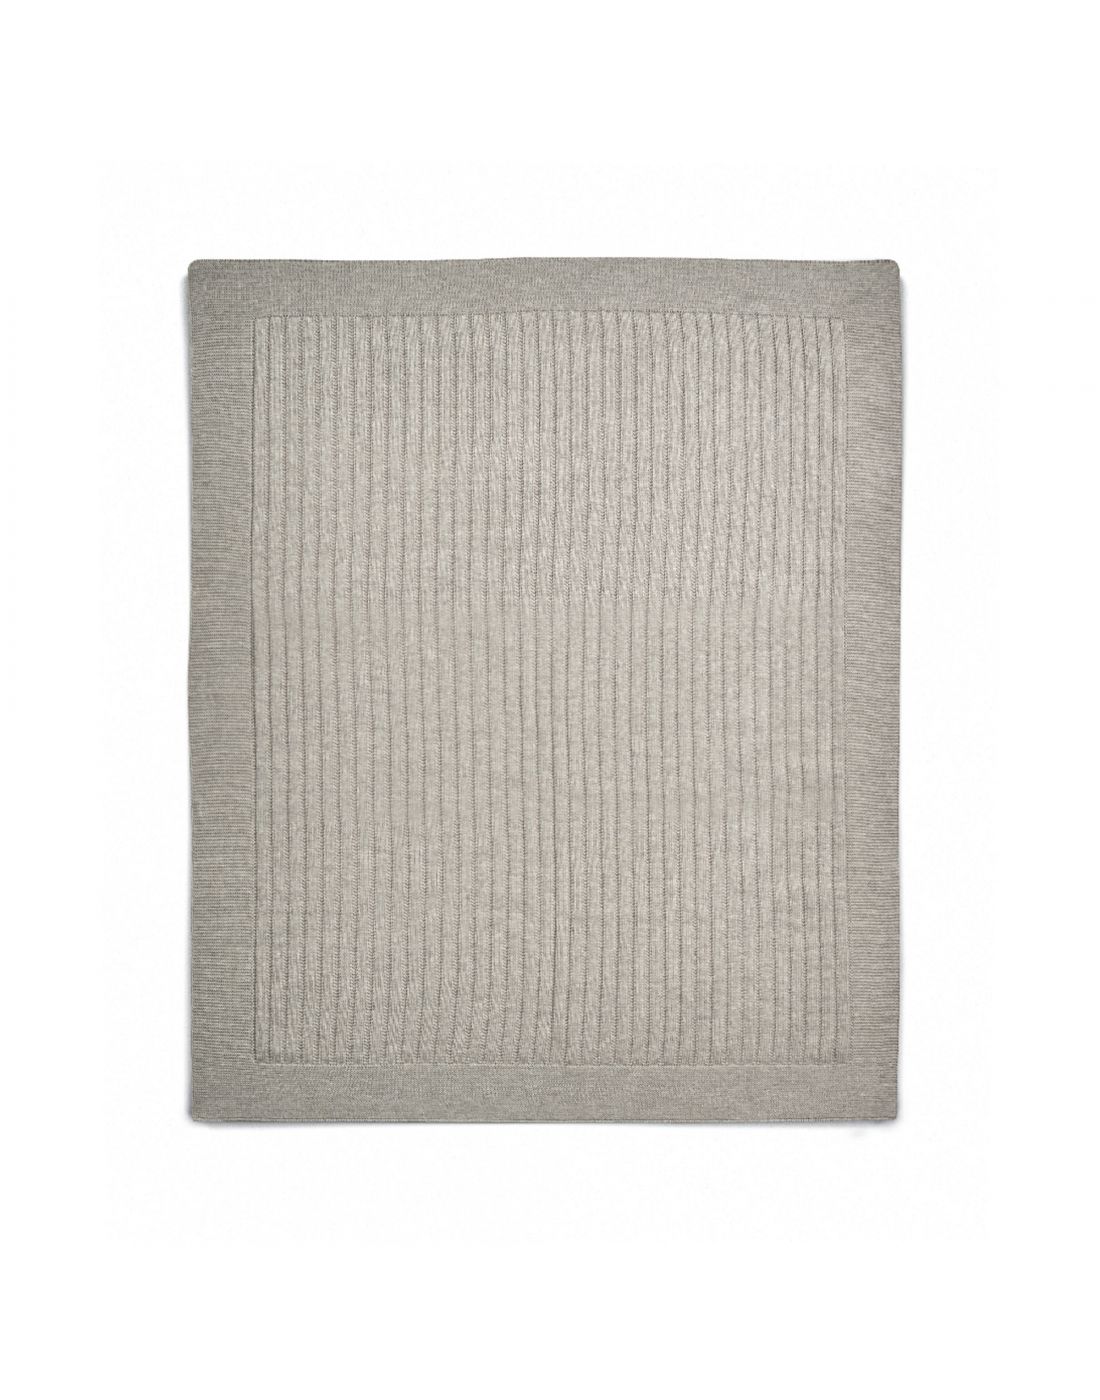 Mamas & Papas Knitted Blanket SML 70*90cm Nocturn